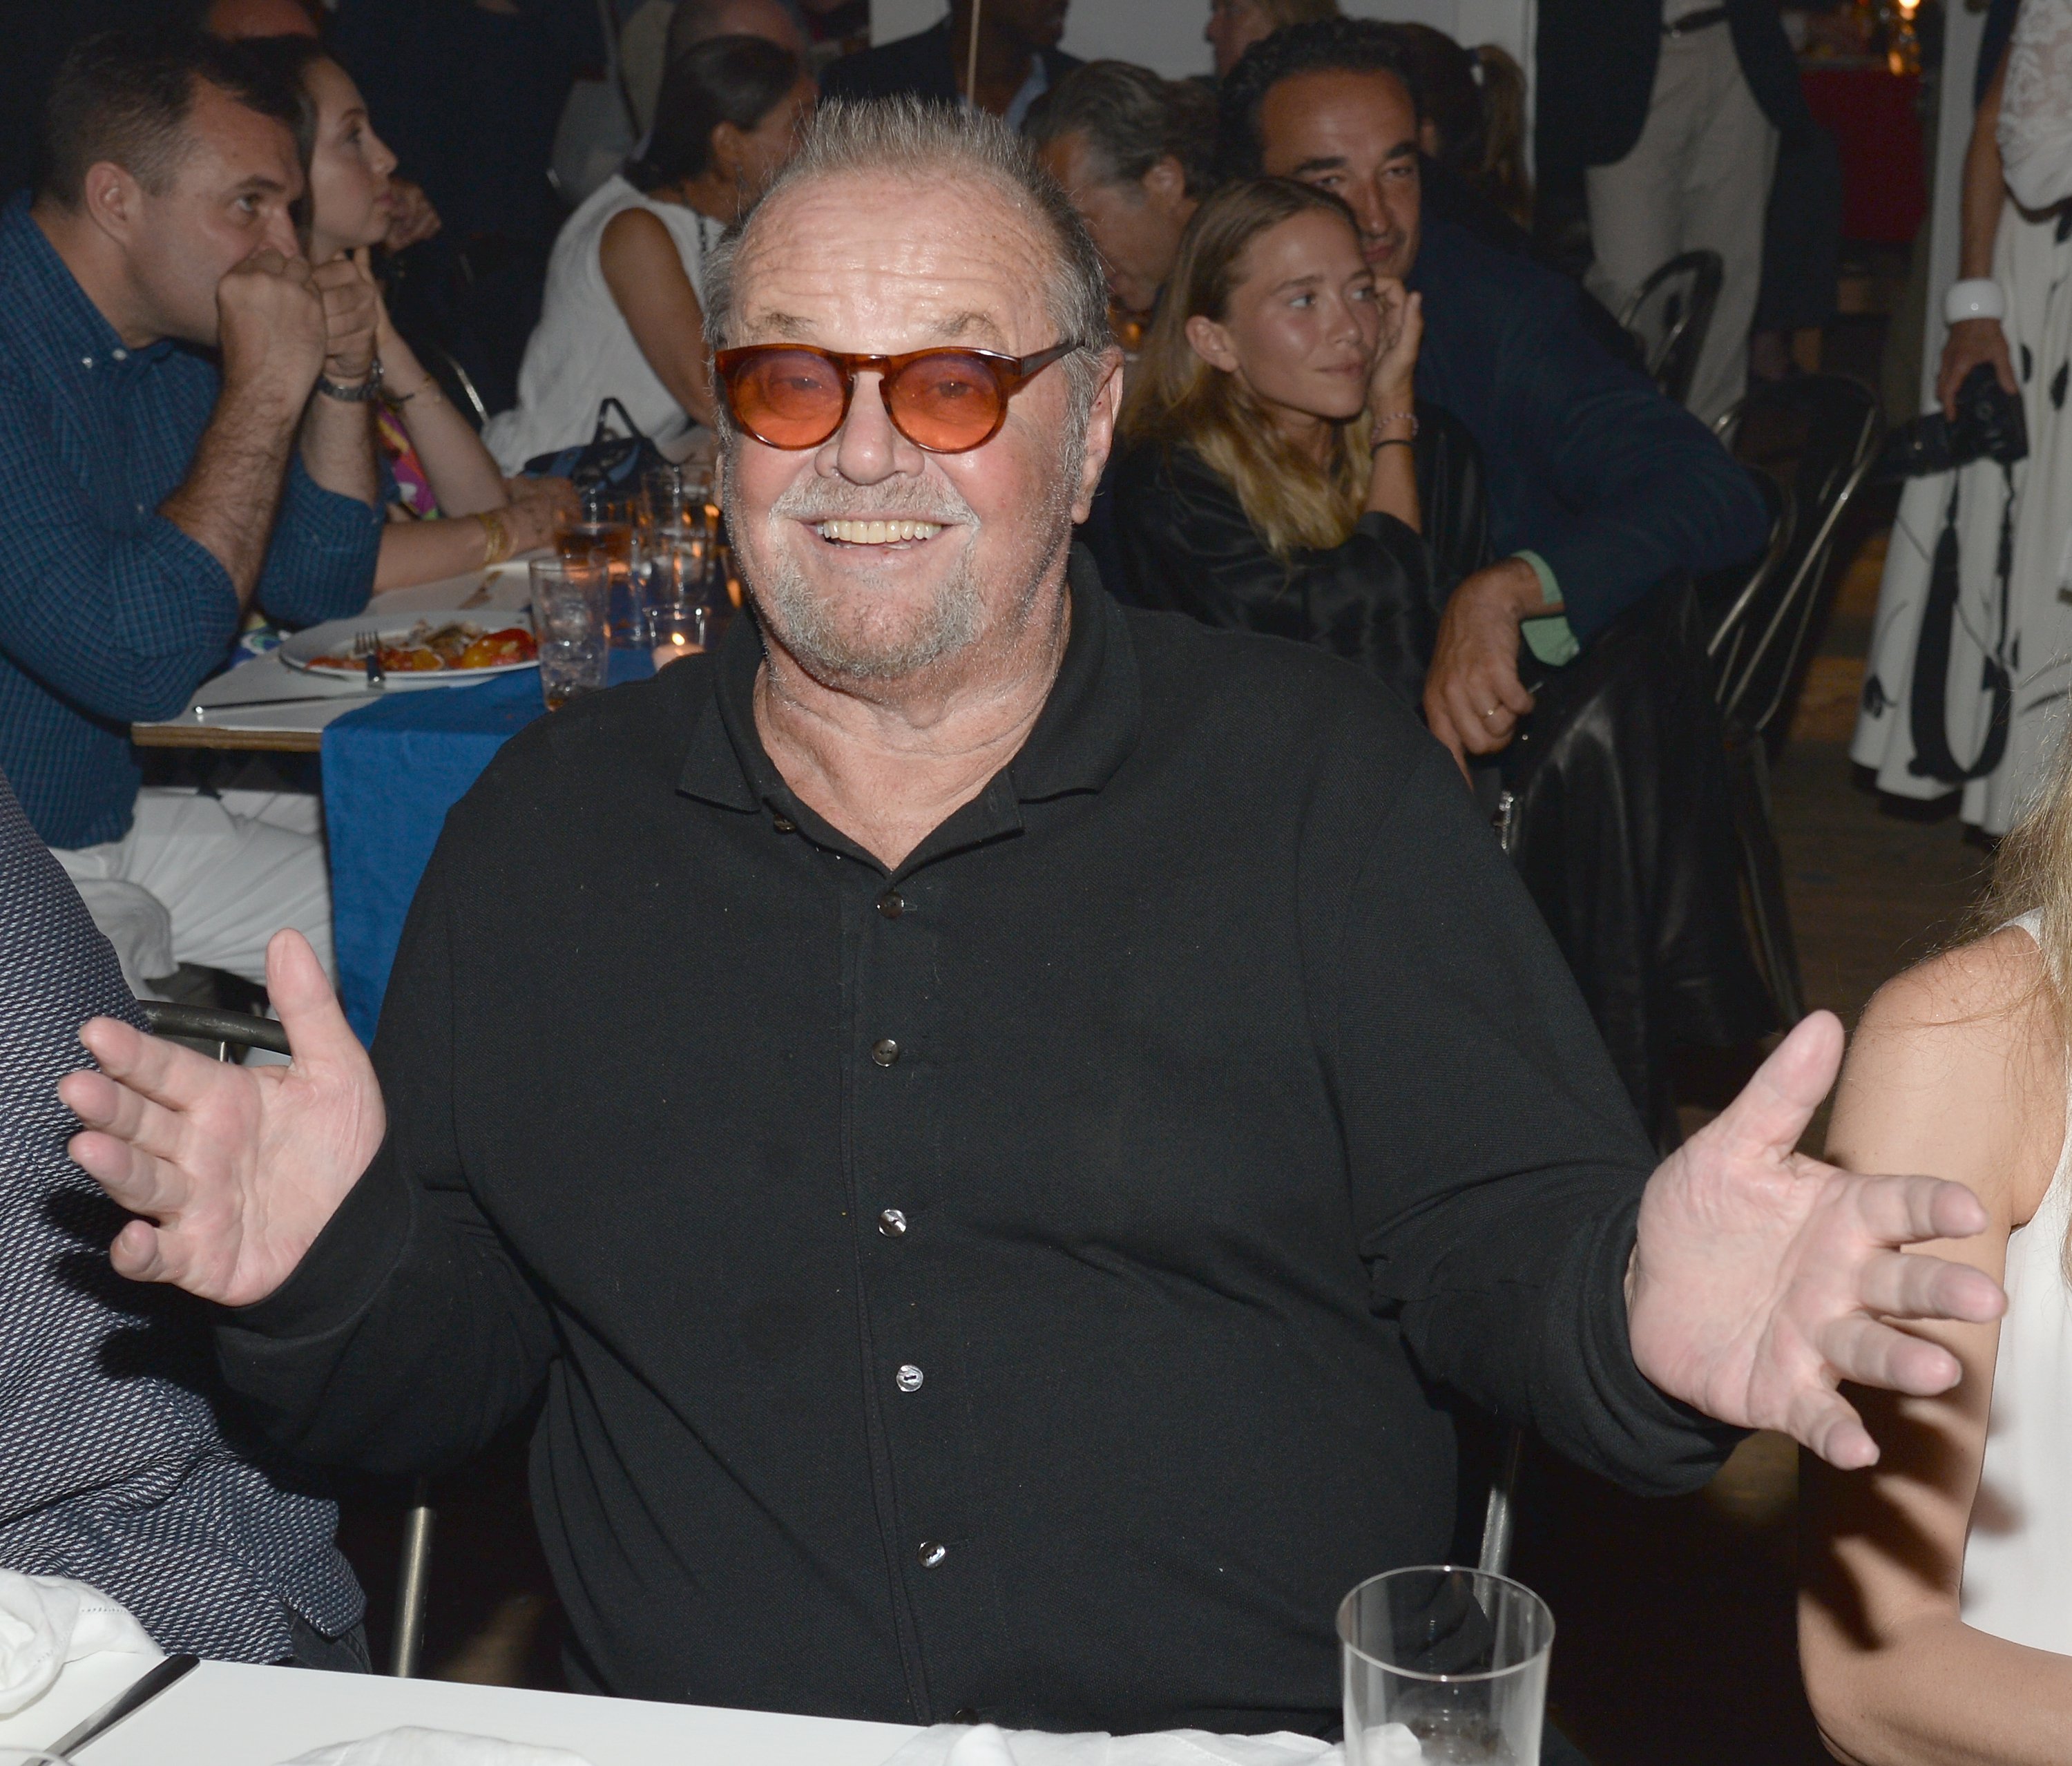 Jack Nicholson at Apollo in the Hamptons 2015 at The Creeks on August 15, 2015 | Source: Getty Images